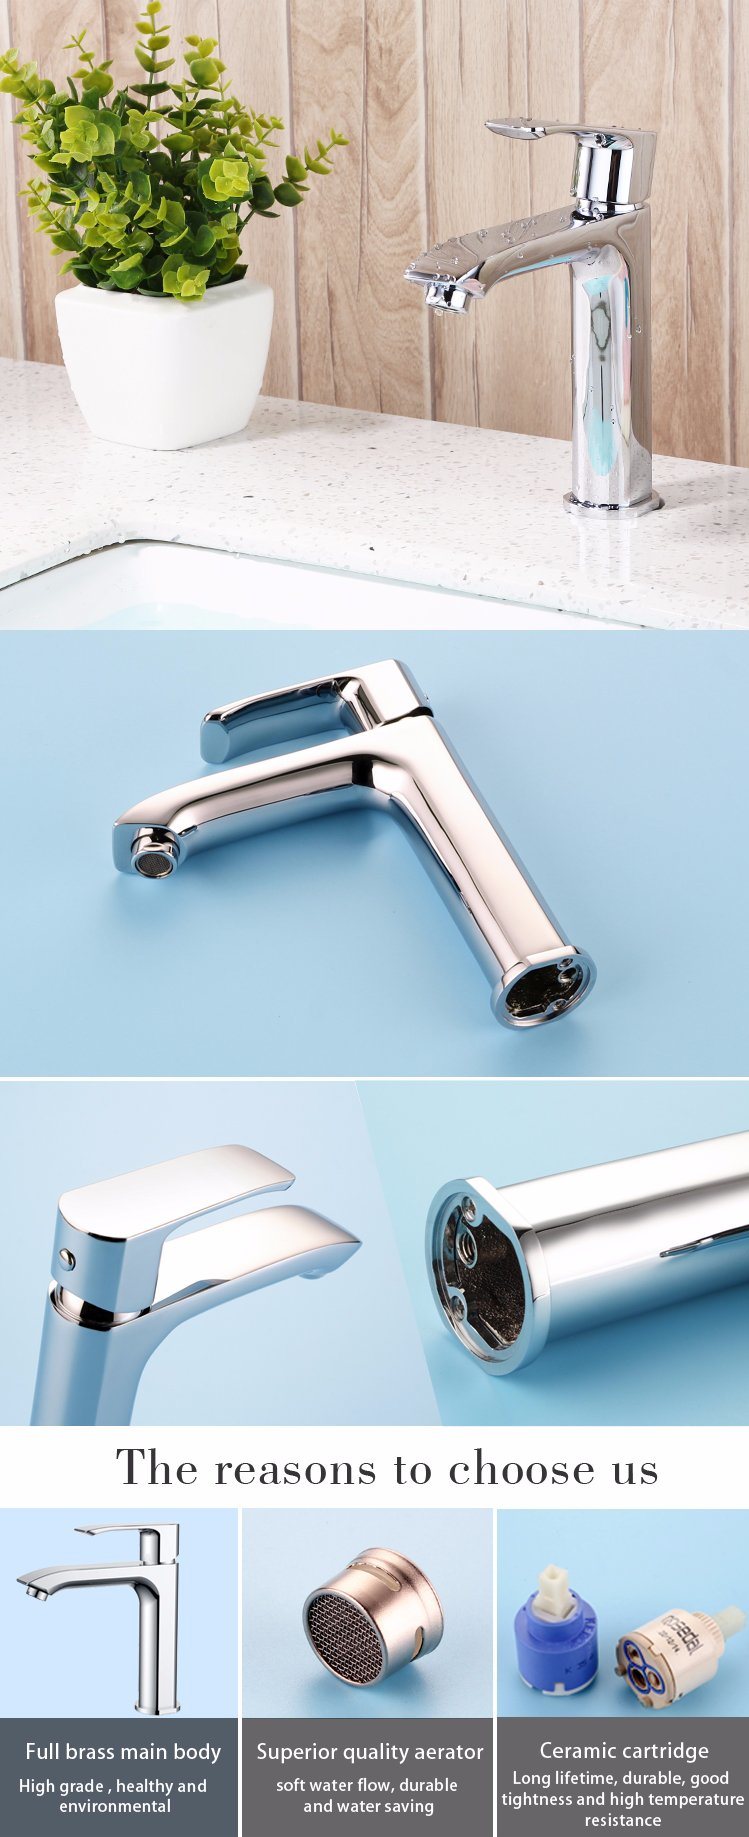 Bathroom Basin Mixer Tap Polished in Chrome Deck Mounted Water Faucet